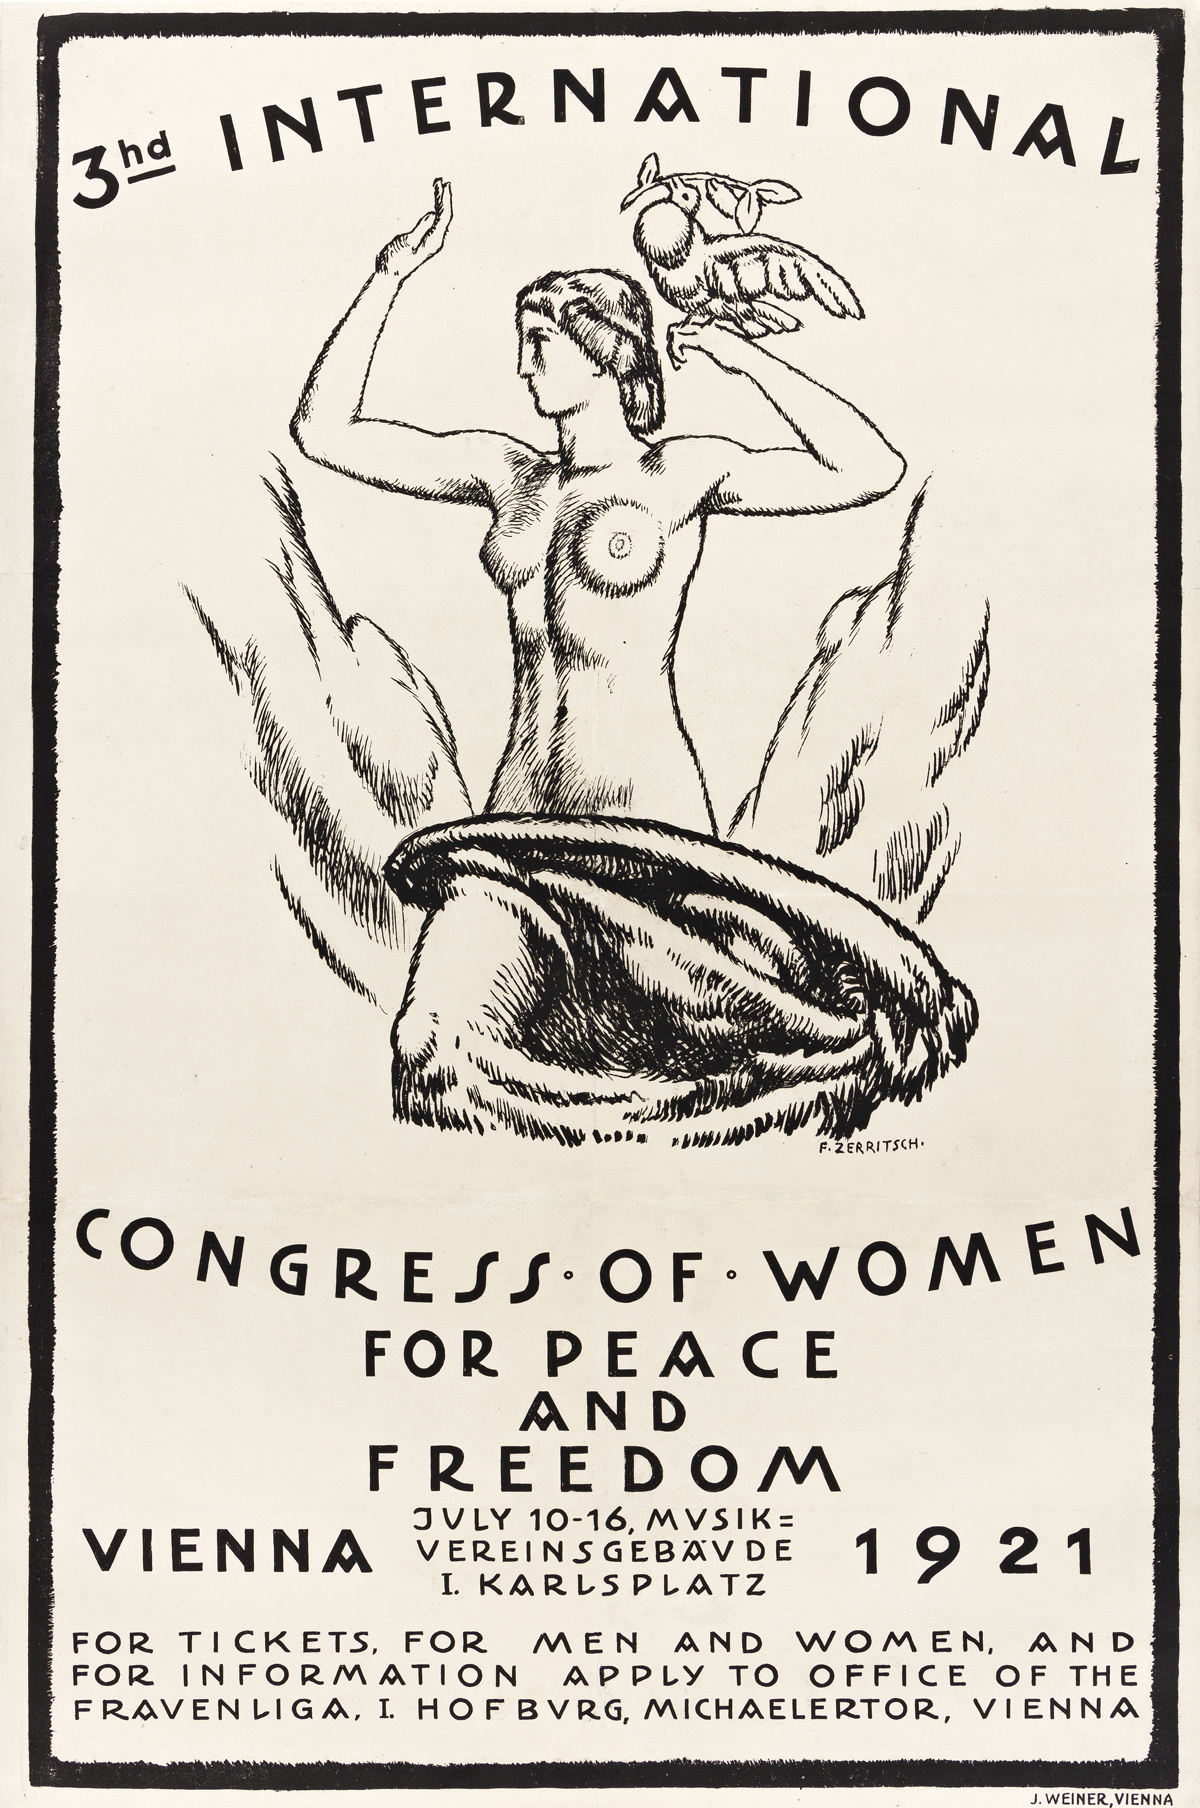 FRITZ ZERRITSCH (1888-1985).  3HD INTERNATIONAL CONGRESS OF WOMEN / FOR PEACE AND FREEDOM. 1921. 37½x24¾ inches, 95¼x62¾ cm. J. Weiner,